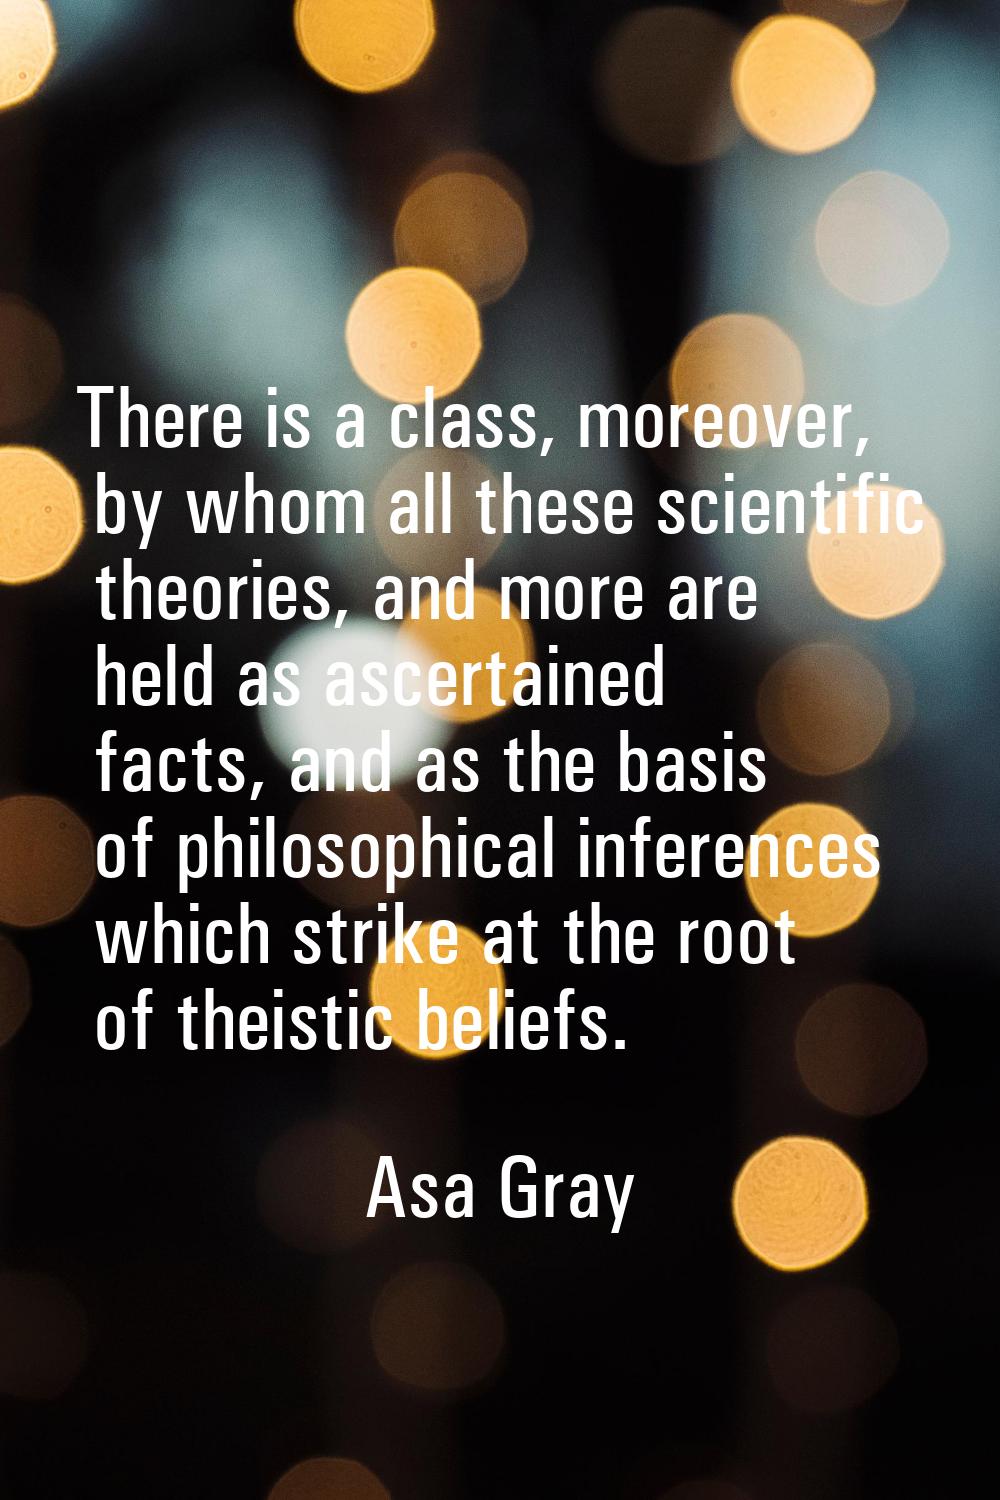 There is a class, moreover, by whom all these scientific theories, and more are held as ascertained